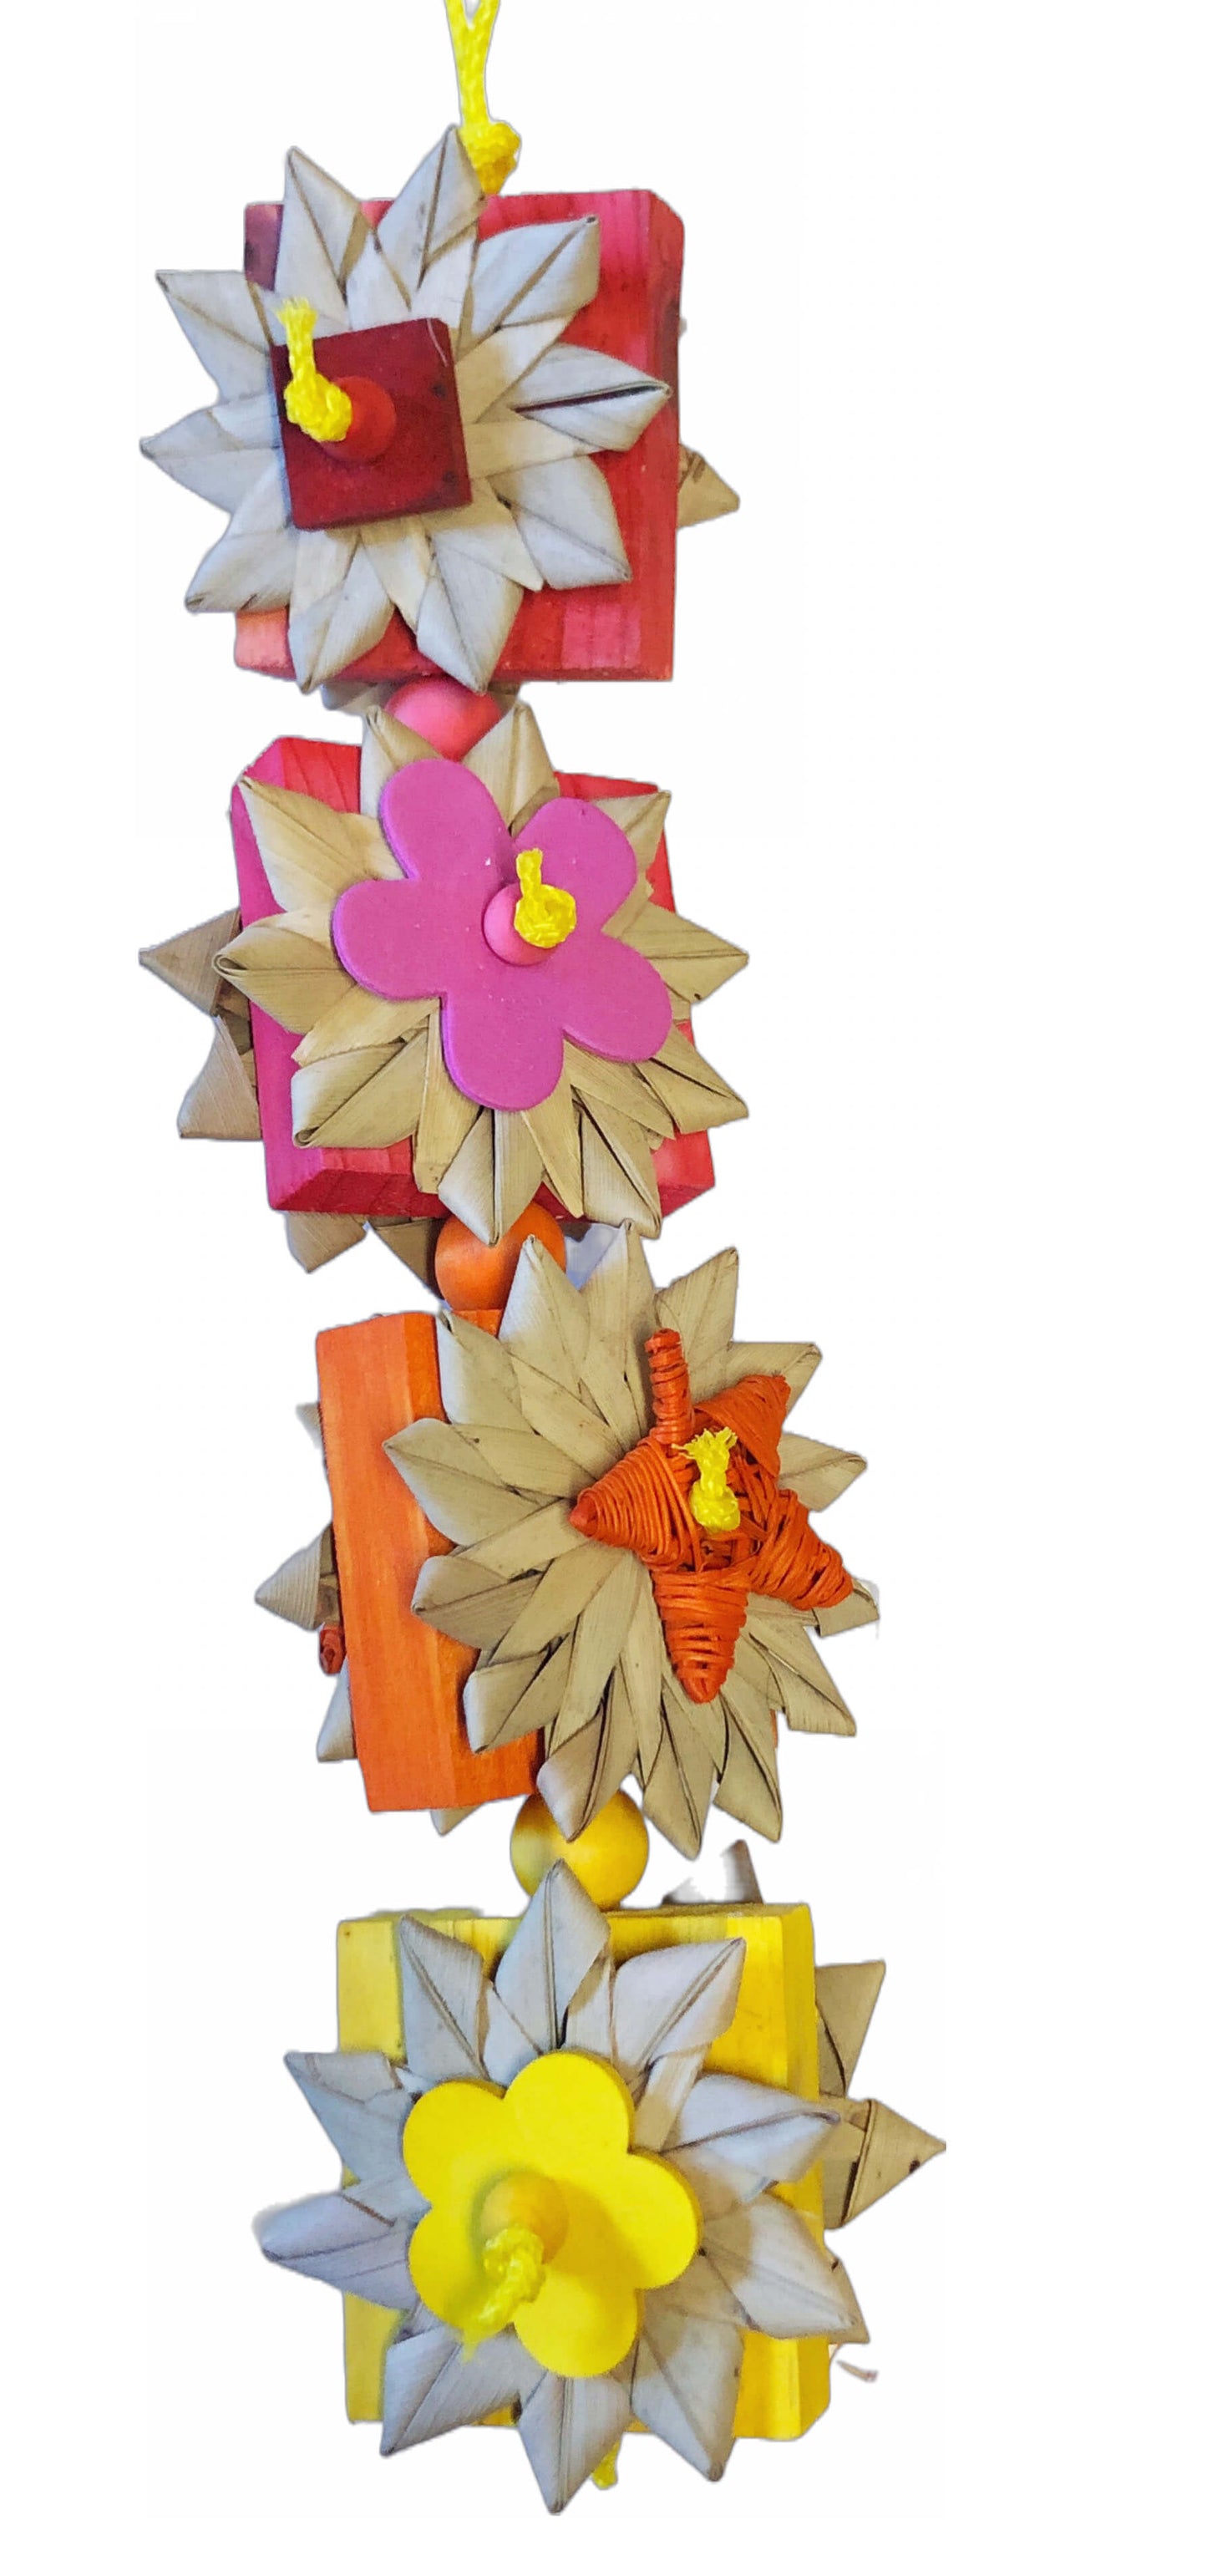 fun colorful bird toys with palm flowers and wood blocks